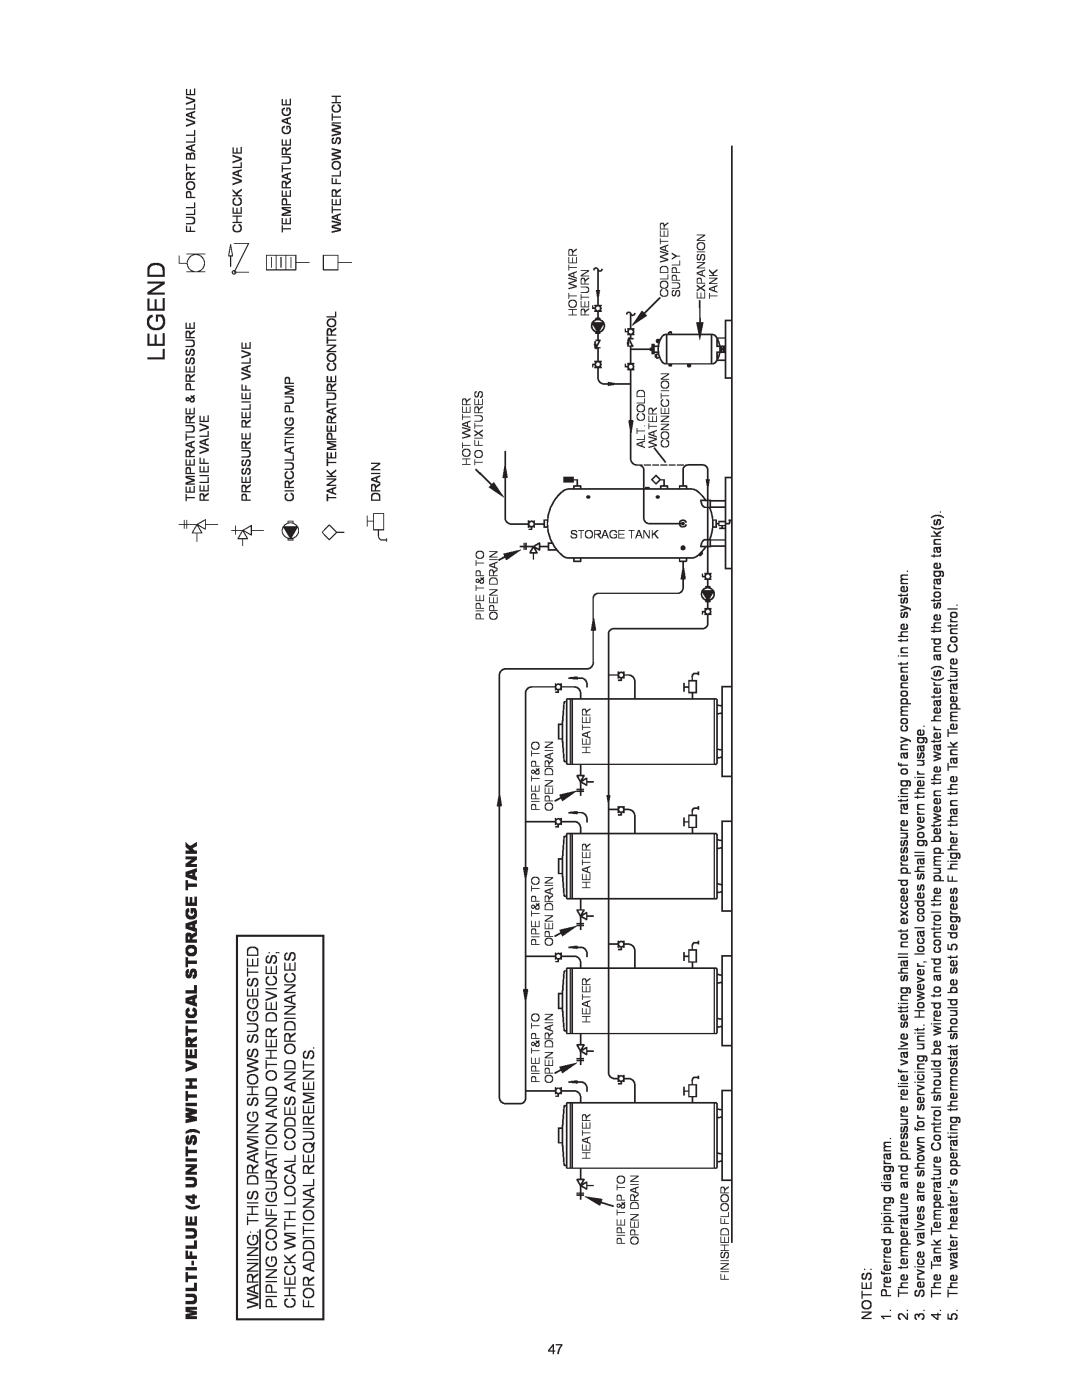 State Industries SBD85500PE, SBD85500NE instruction manual MULTI-FLUE 4 UNITS WITH VERTICAL STORAGE TANK 